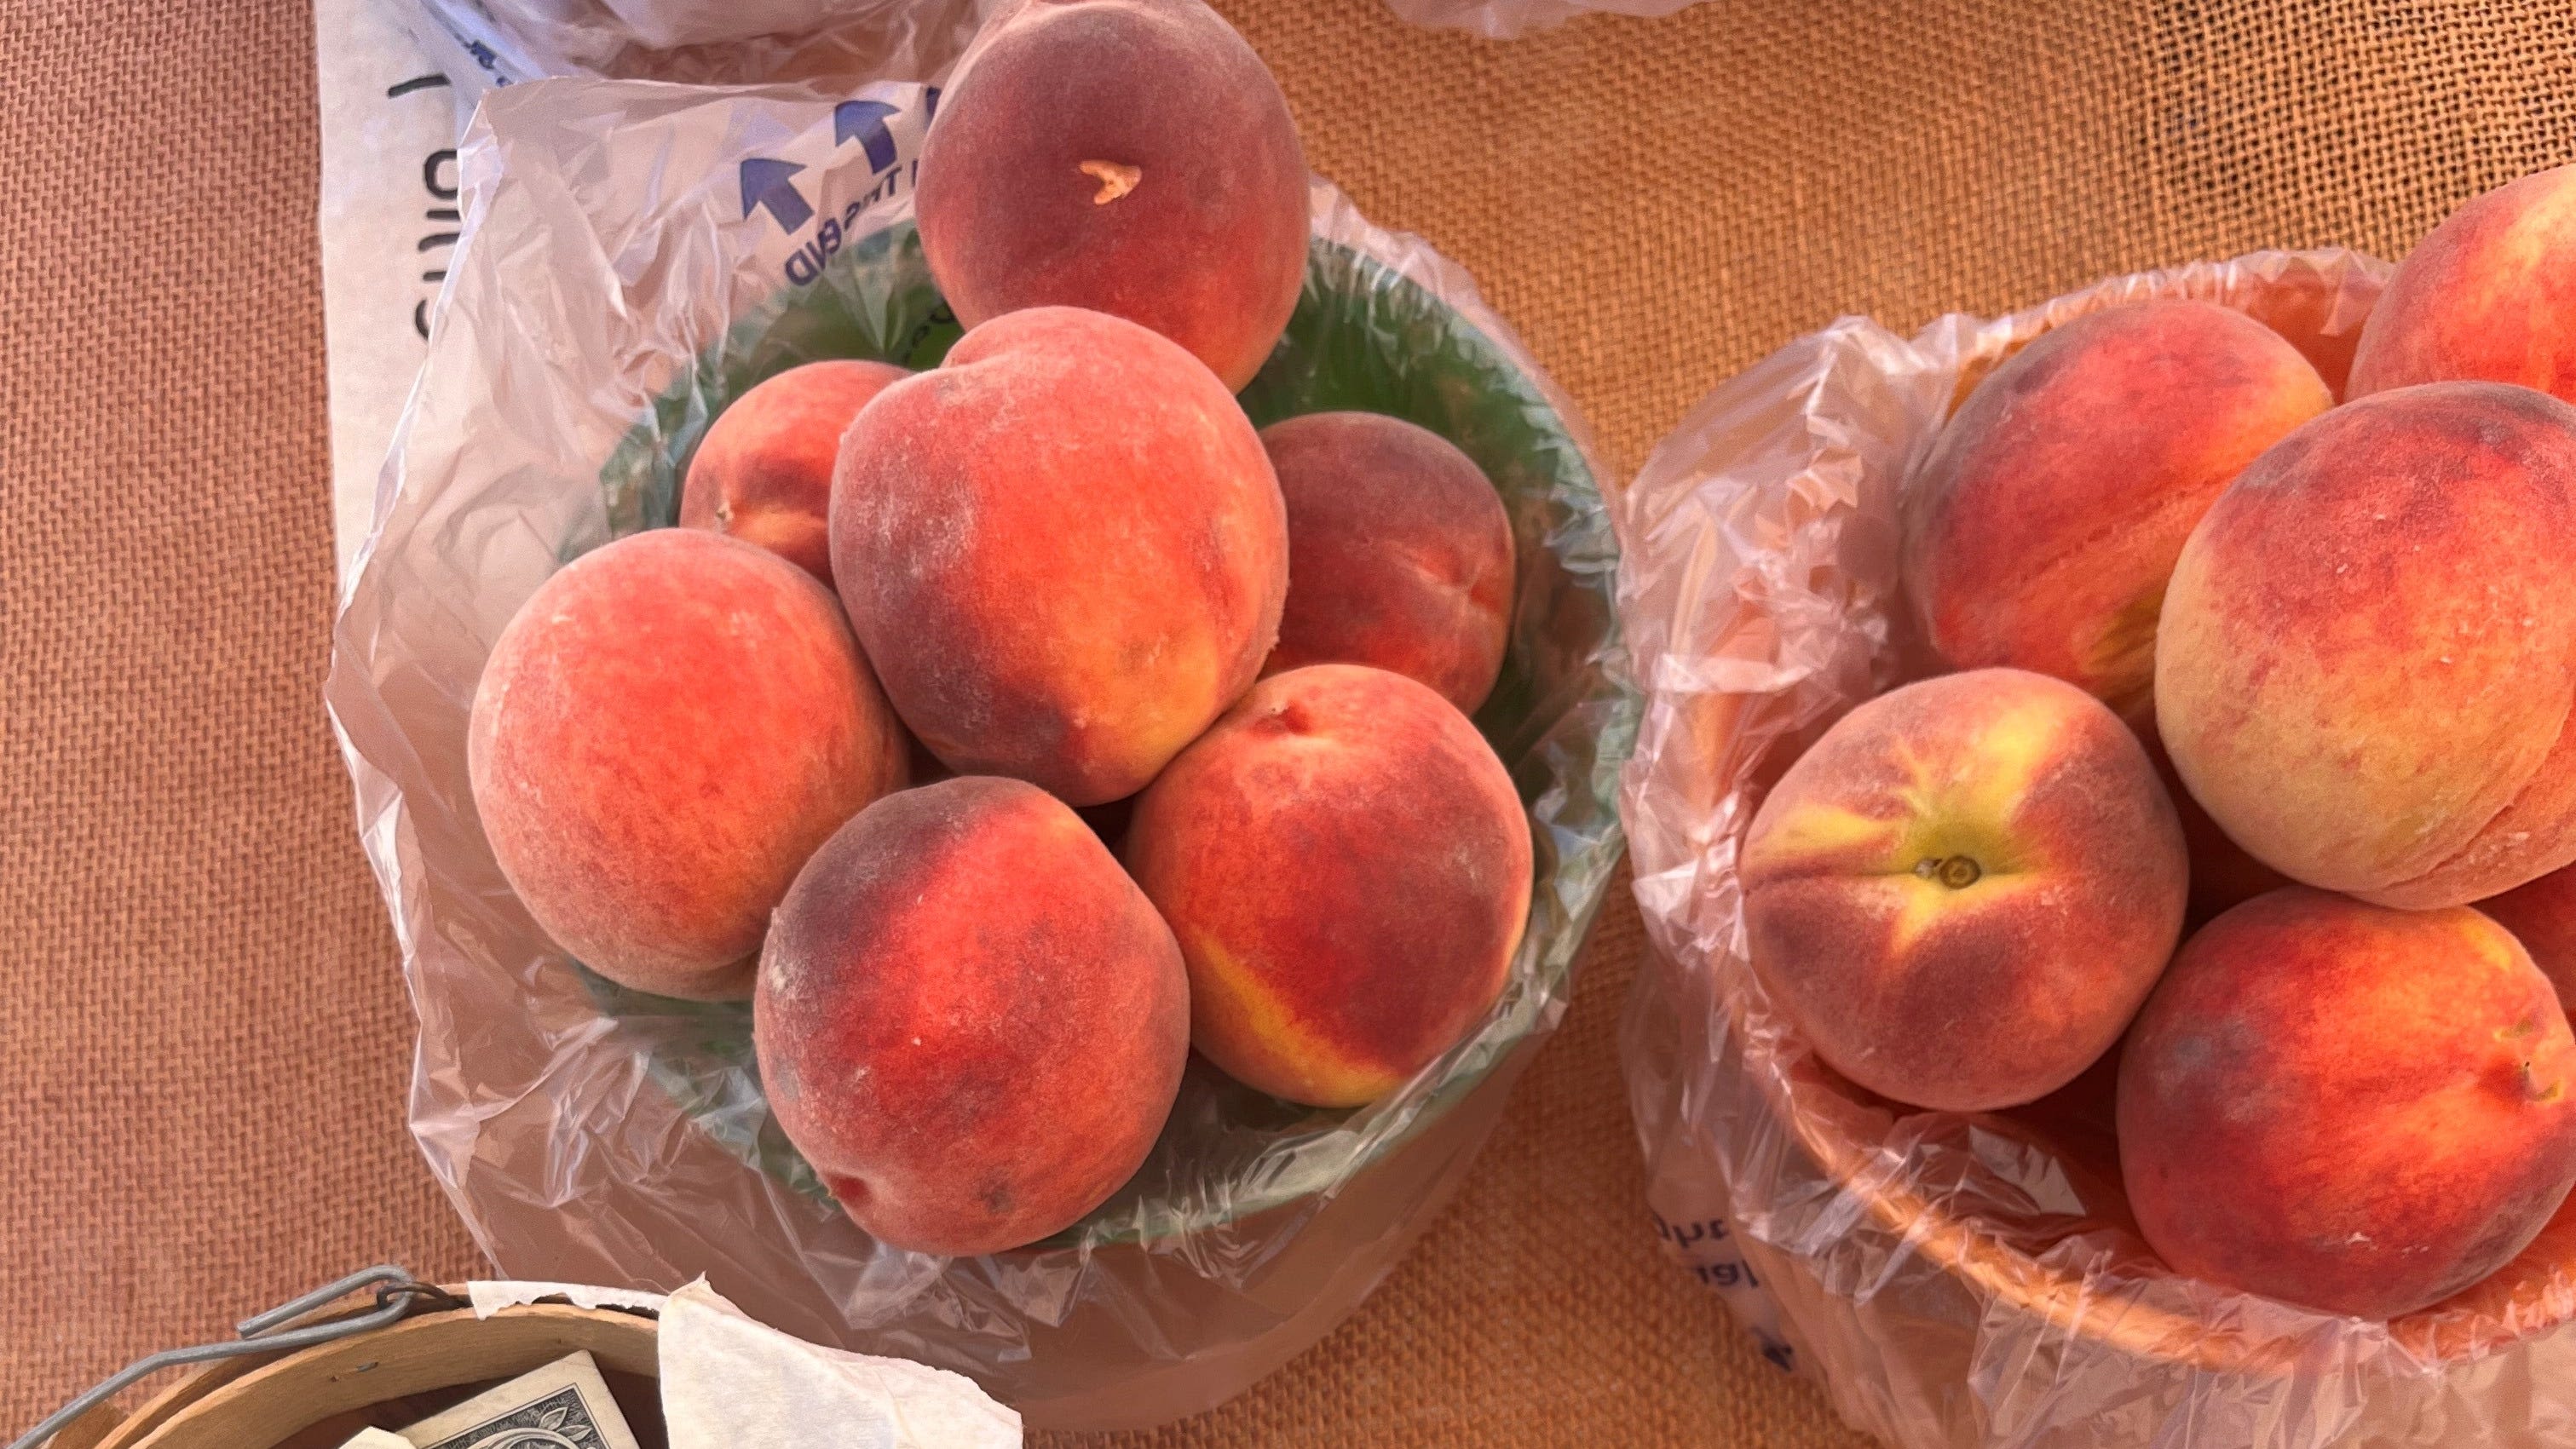 Popular Palisade peaches arrive early to Colorado's Front Range